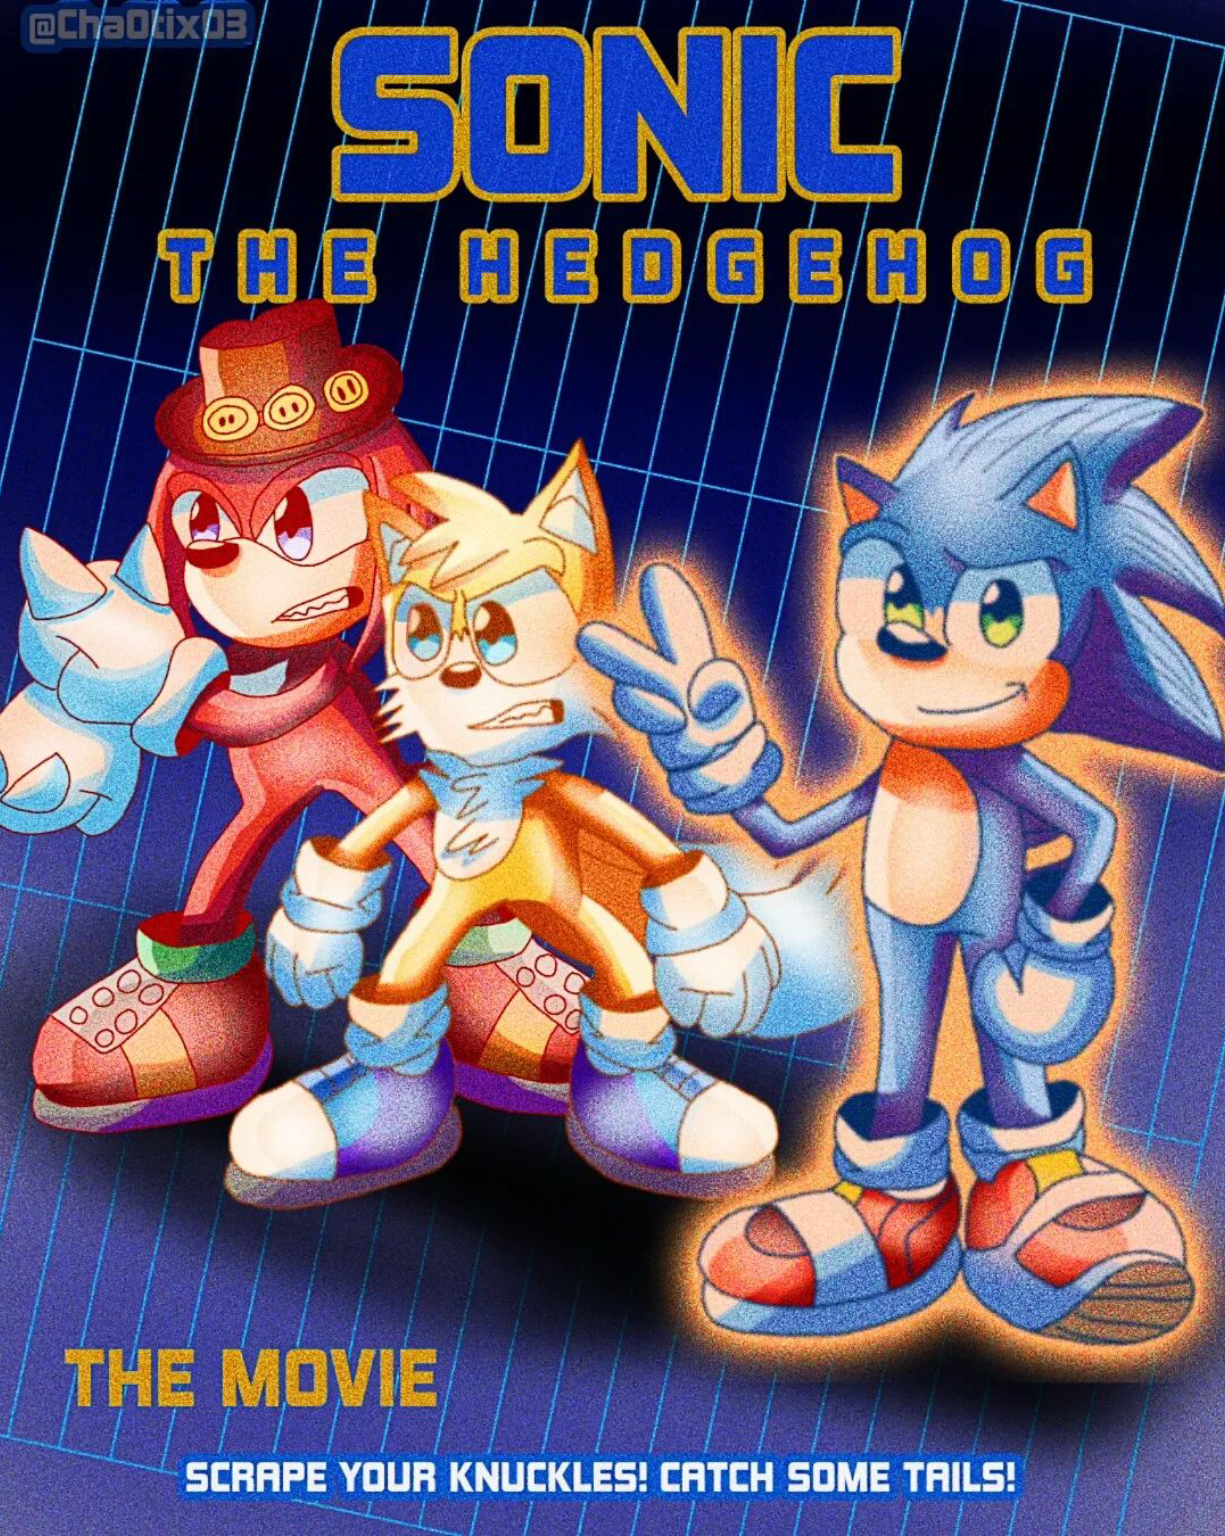 Sonic The Hedgehog 2 Movie Poster - Modern Style - by Nibroc-Rock on  DeviantArt